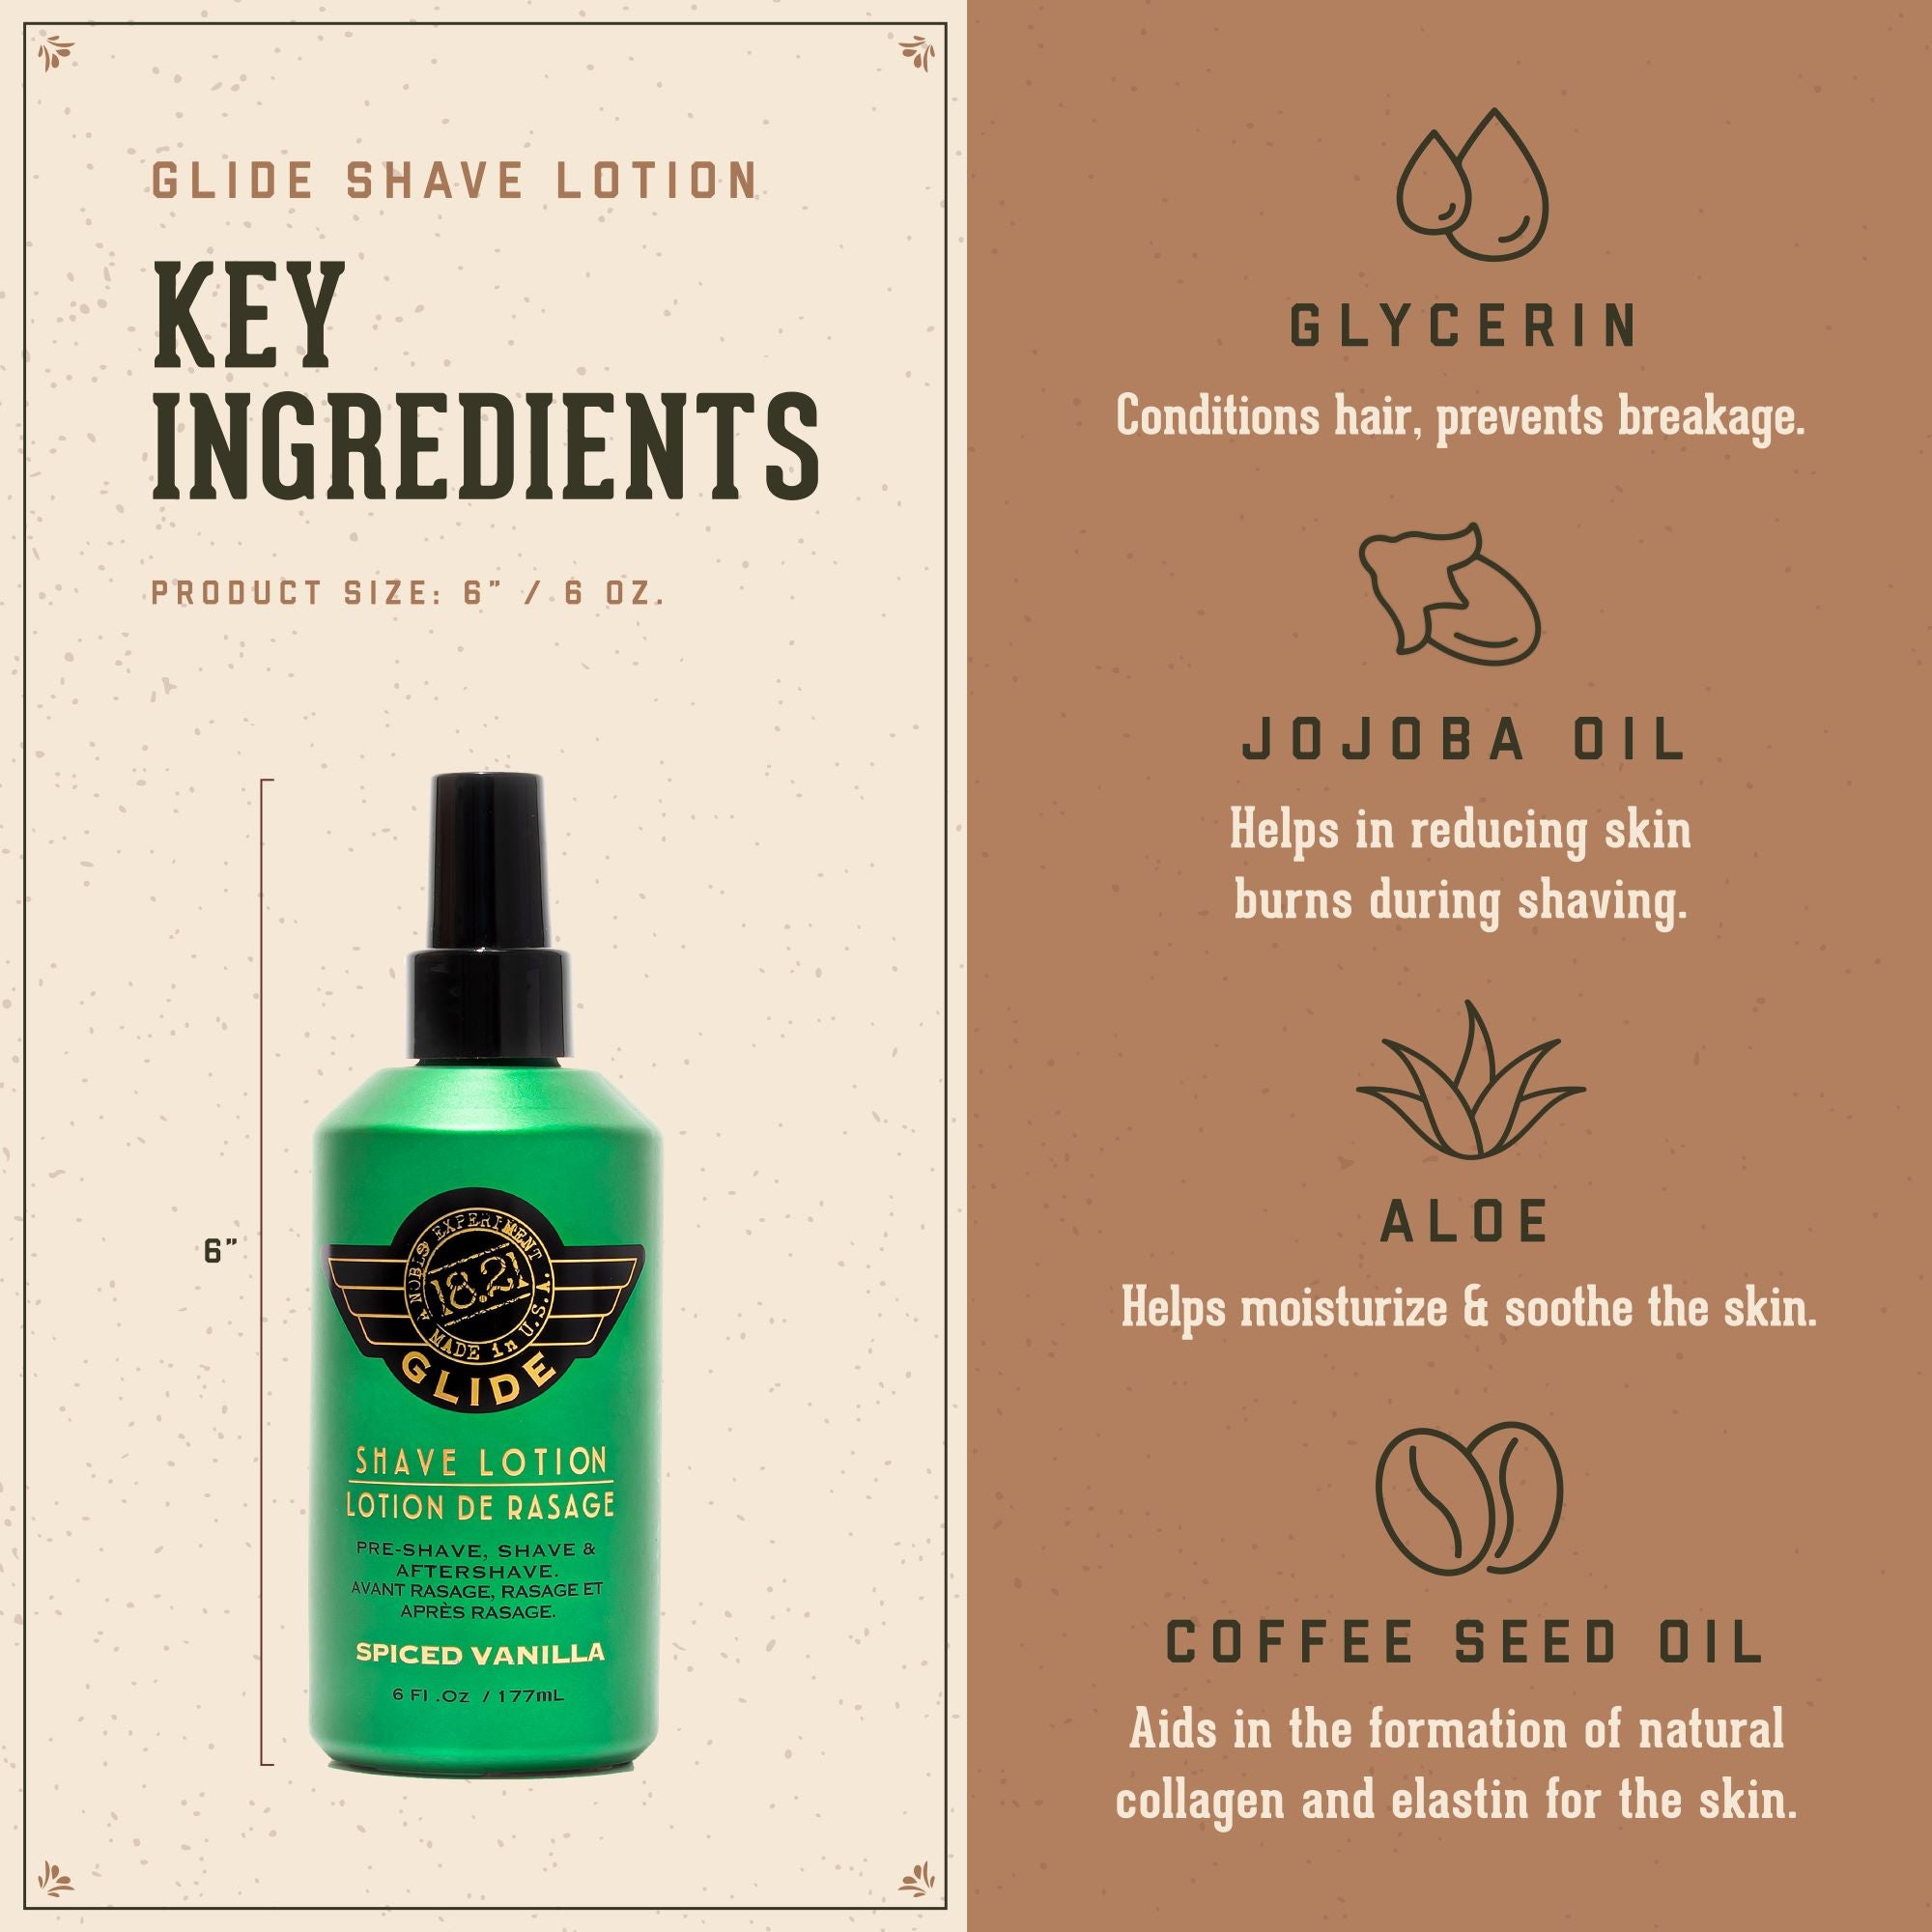 Glide Shave Lotion Key Ingredients: 1. Glycerin: contidions hair, prevents breakage. 2. Jojoba oil: helps in reducing skin burns during shaving. 3. Aloe: helps moisturize & soothe the skin. 4. Coffee Seed Oil: aids in the formation of natural collagen and elastin for the skin.